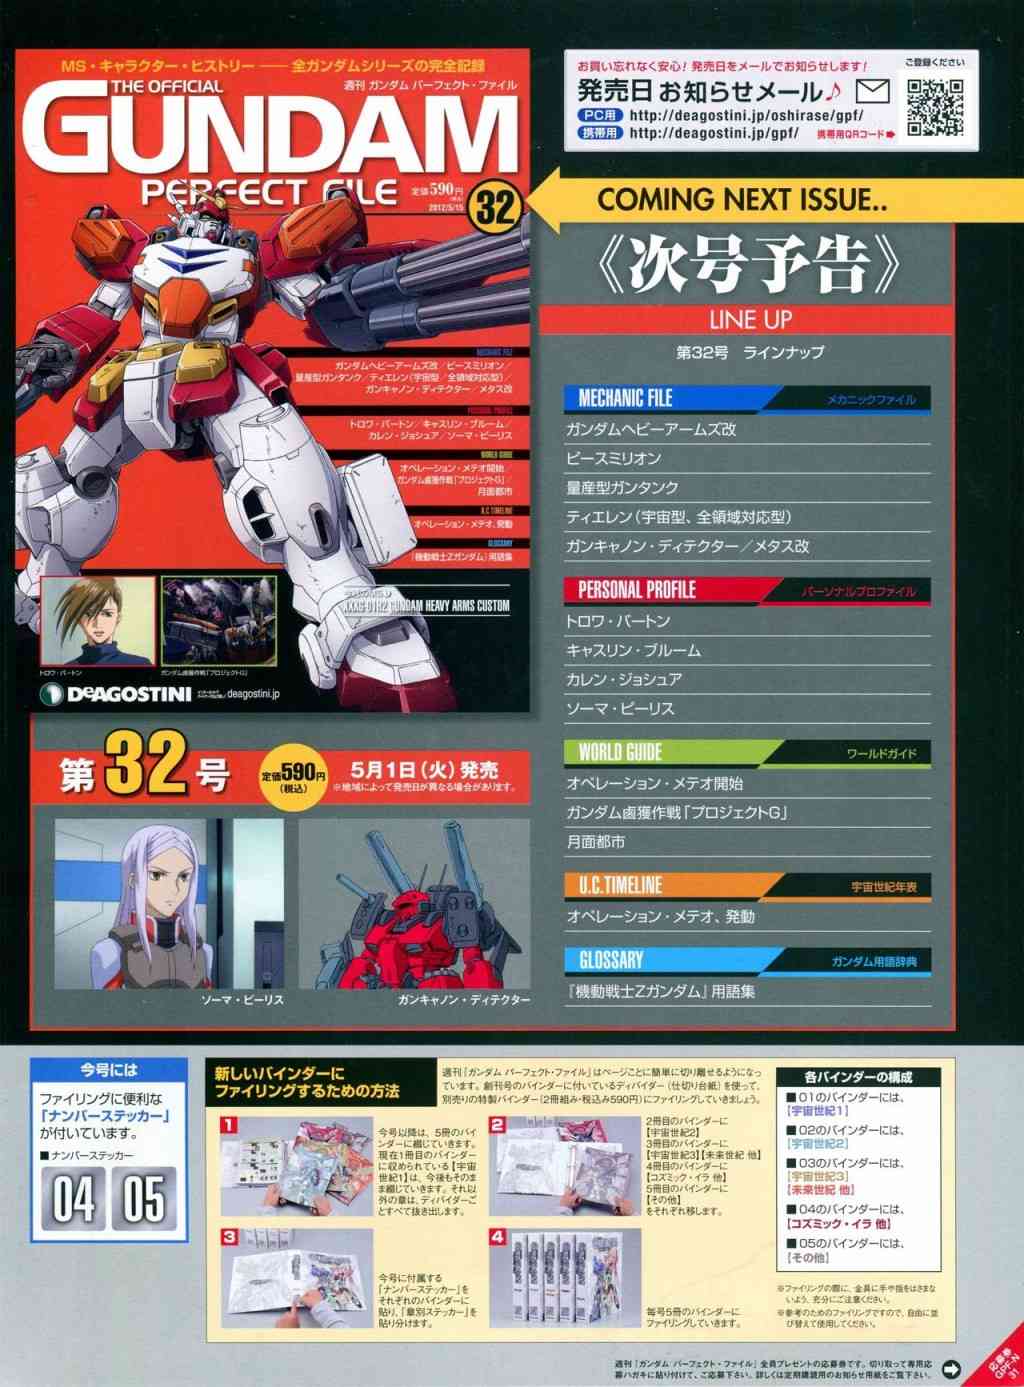 The Official Gundam Perfect File  - 第31-40話(1/8) - 6